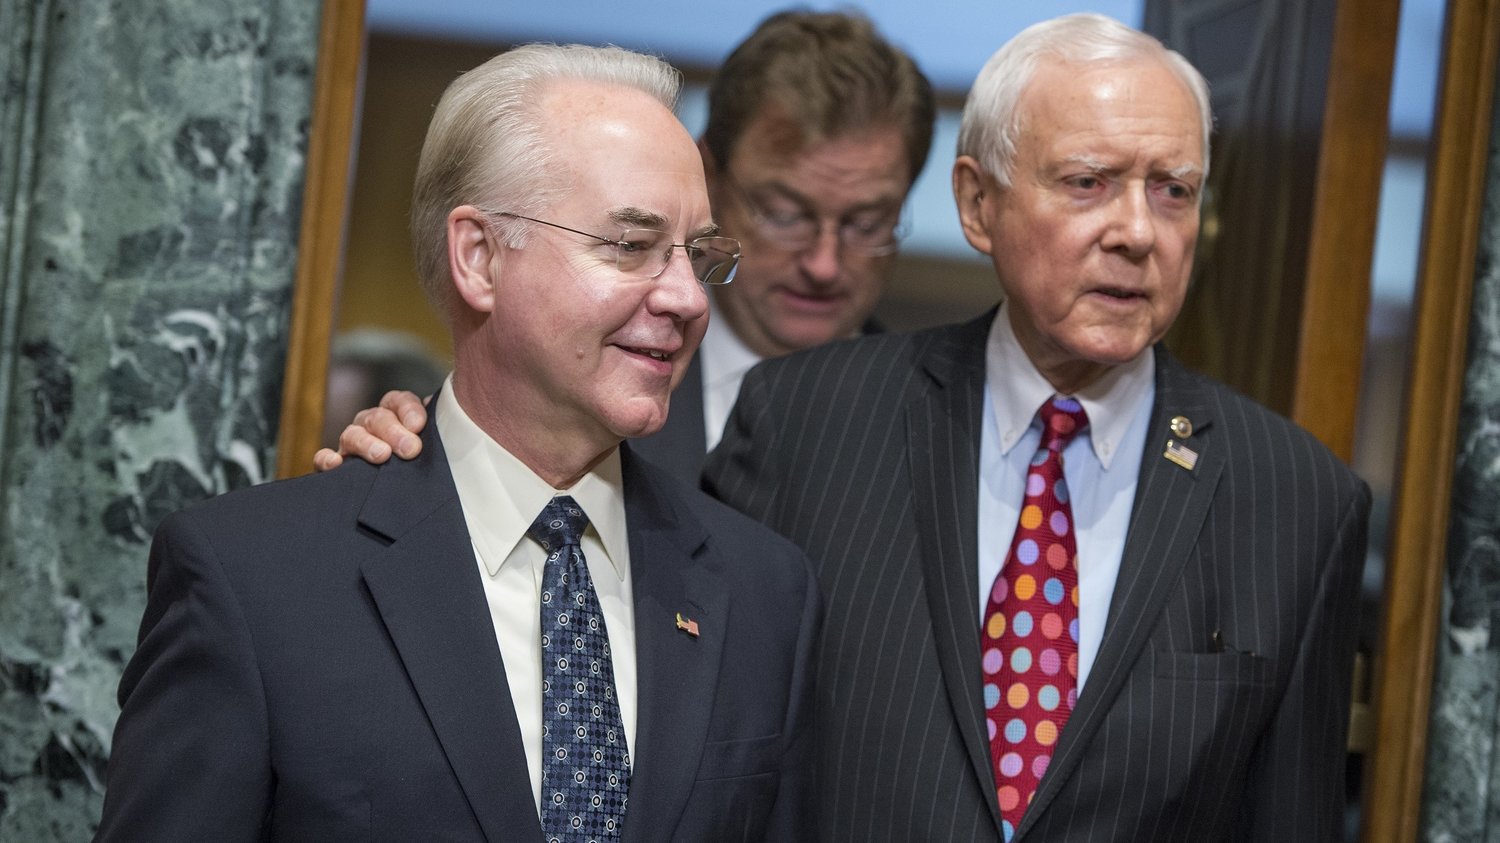 Rep. Tom Price, R-Ga., center, nominee for Health and Human Services secretary, is seen with Chairman Orrin Hatch, R-Utah, before his Senate Finance Committee confirmation hearing on Jan. 24. (Photo by Tom Williams/CQ-Roll Call Inc.)